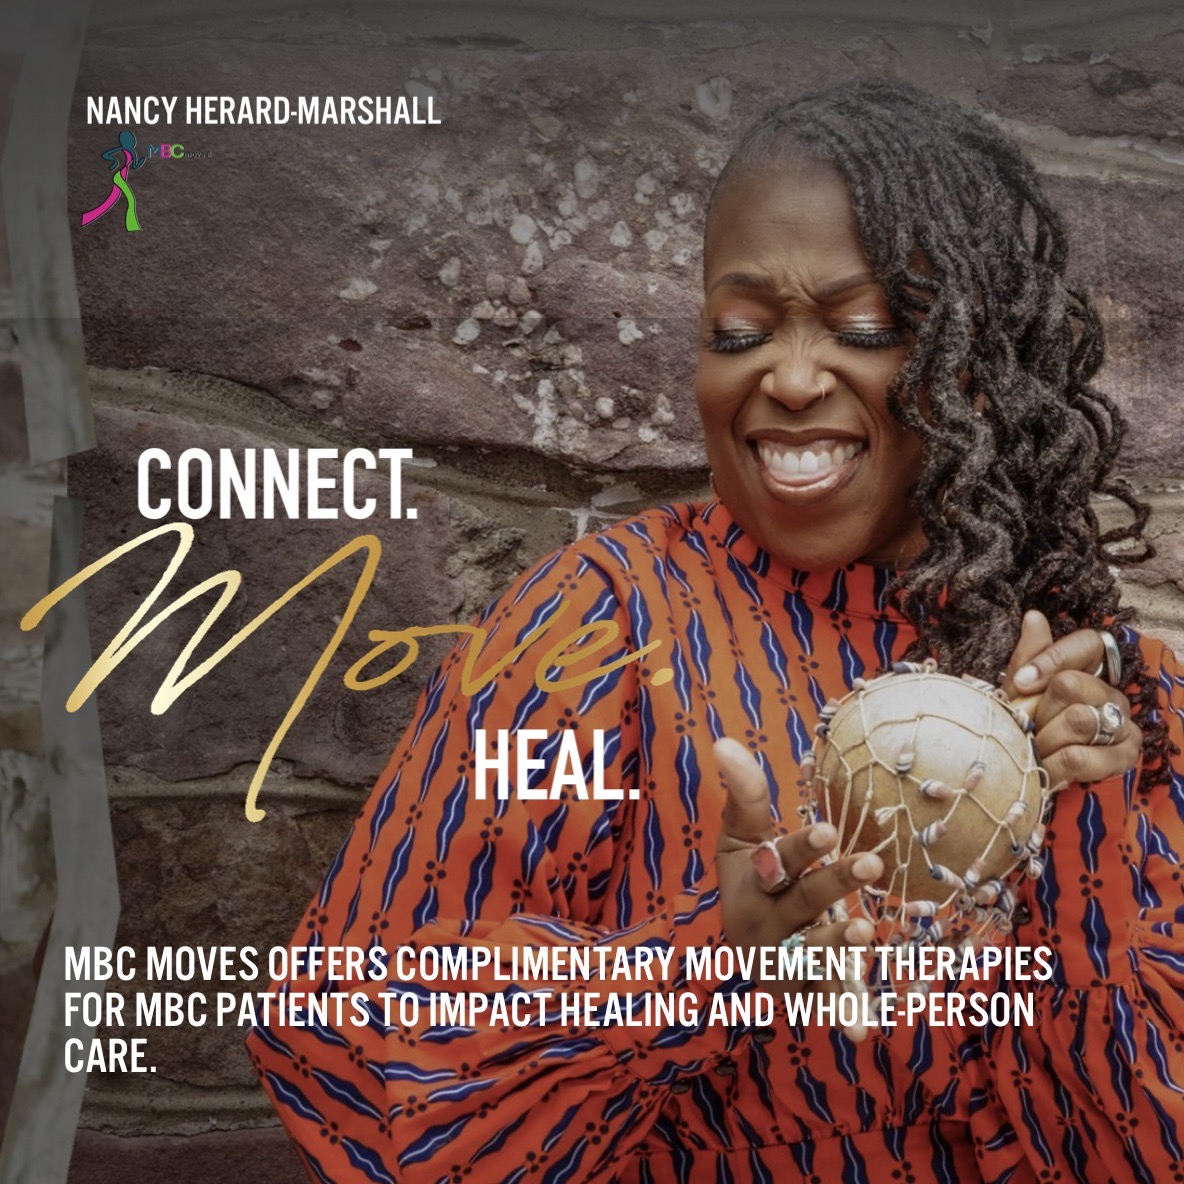 JUST LAUNCHED: Meet our member Nancy Herard-Marshall, whose MBCMoves program connects metastatic breast cancer thrivers to integrative care. Visit her new website and learn more about Nancy: MBCMoves.com